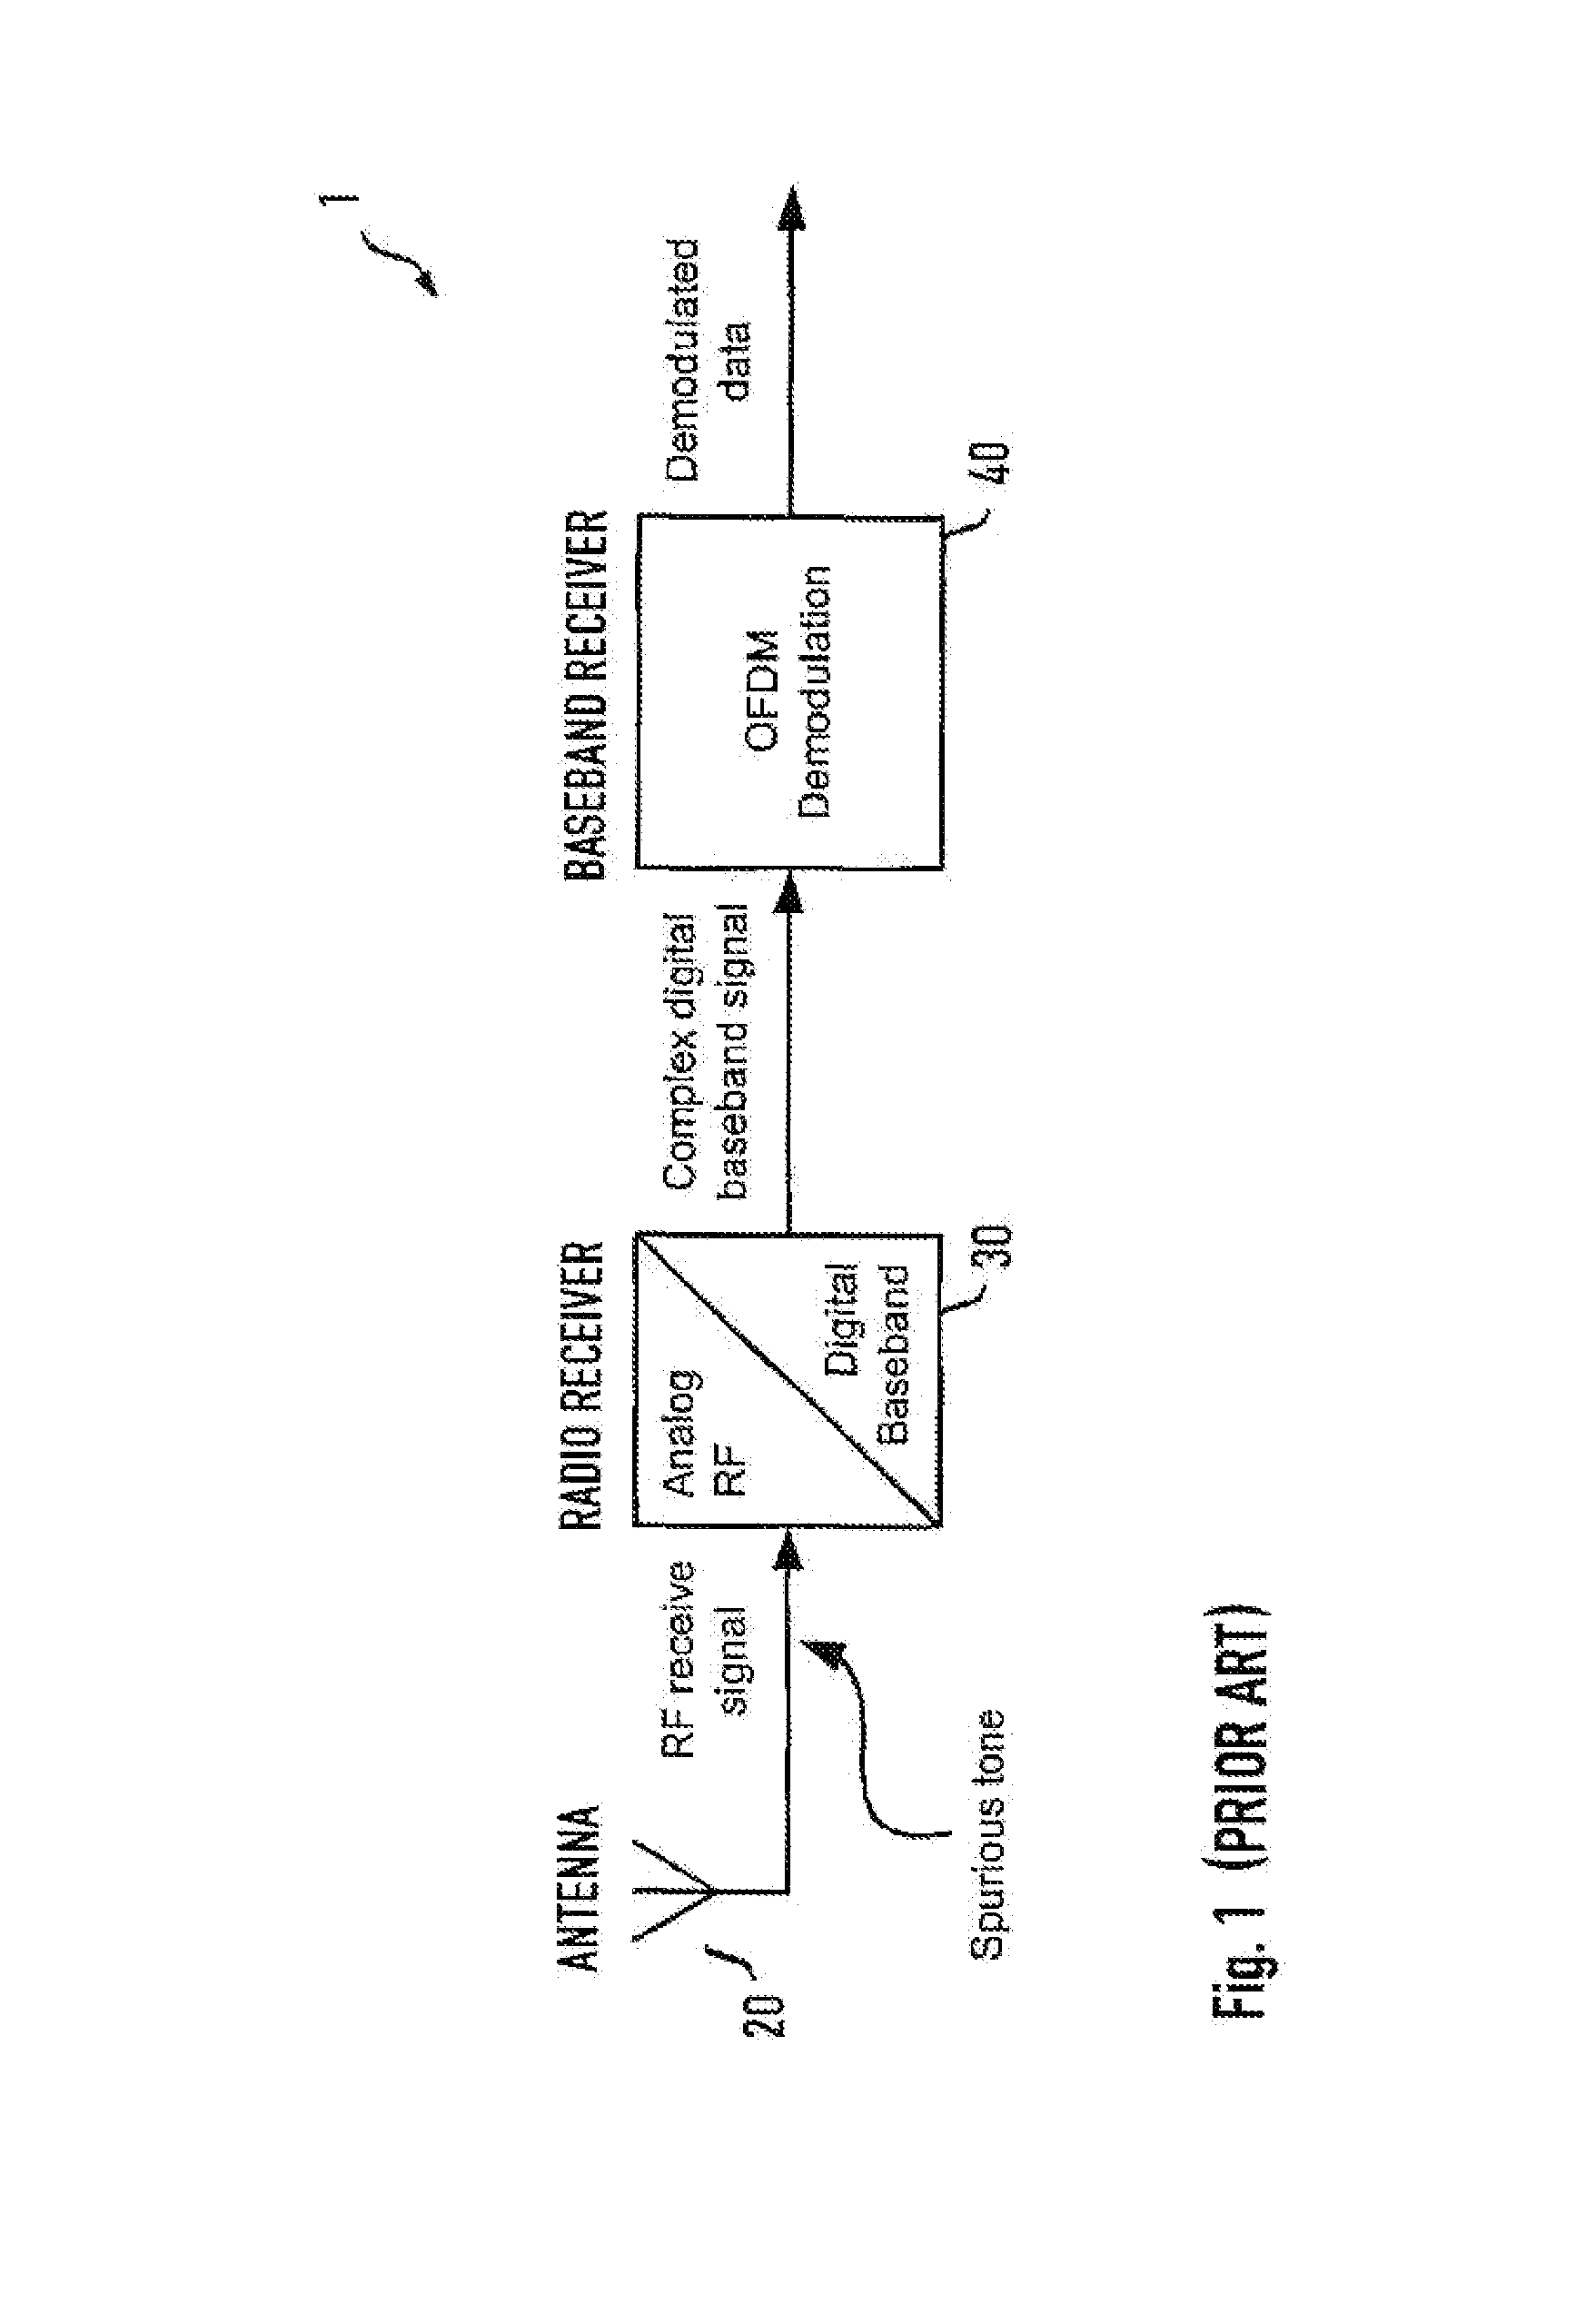 Method and apparatus to cancel additive sinusoidal disturbances in OFDM receivers